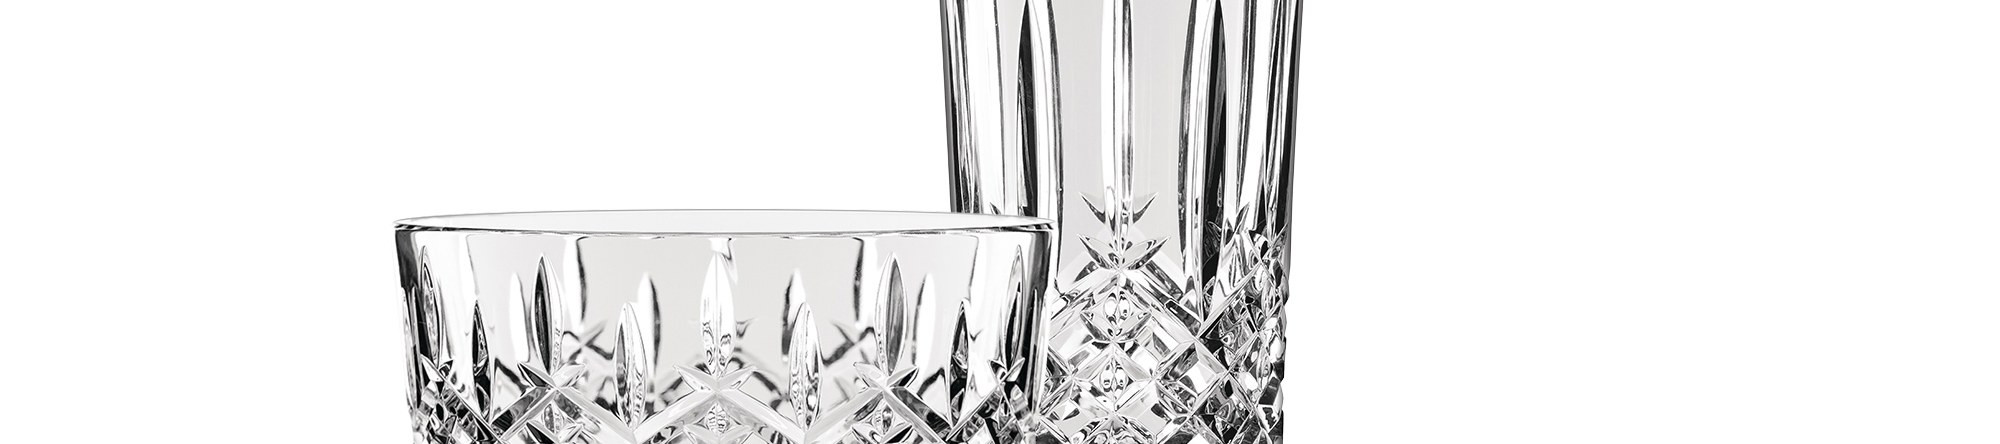 13 Lovable Waterford Marquis Markham Vase 2024 free download waterford marquis markham vase of marquis markham glasses home dacor vases wine glasses more pertaining to marquis markham